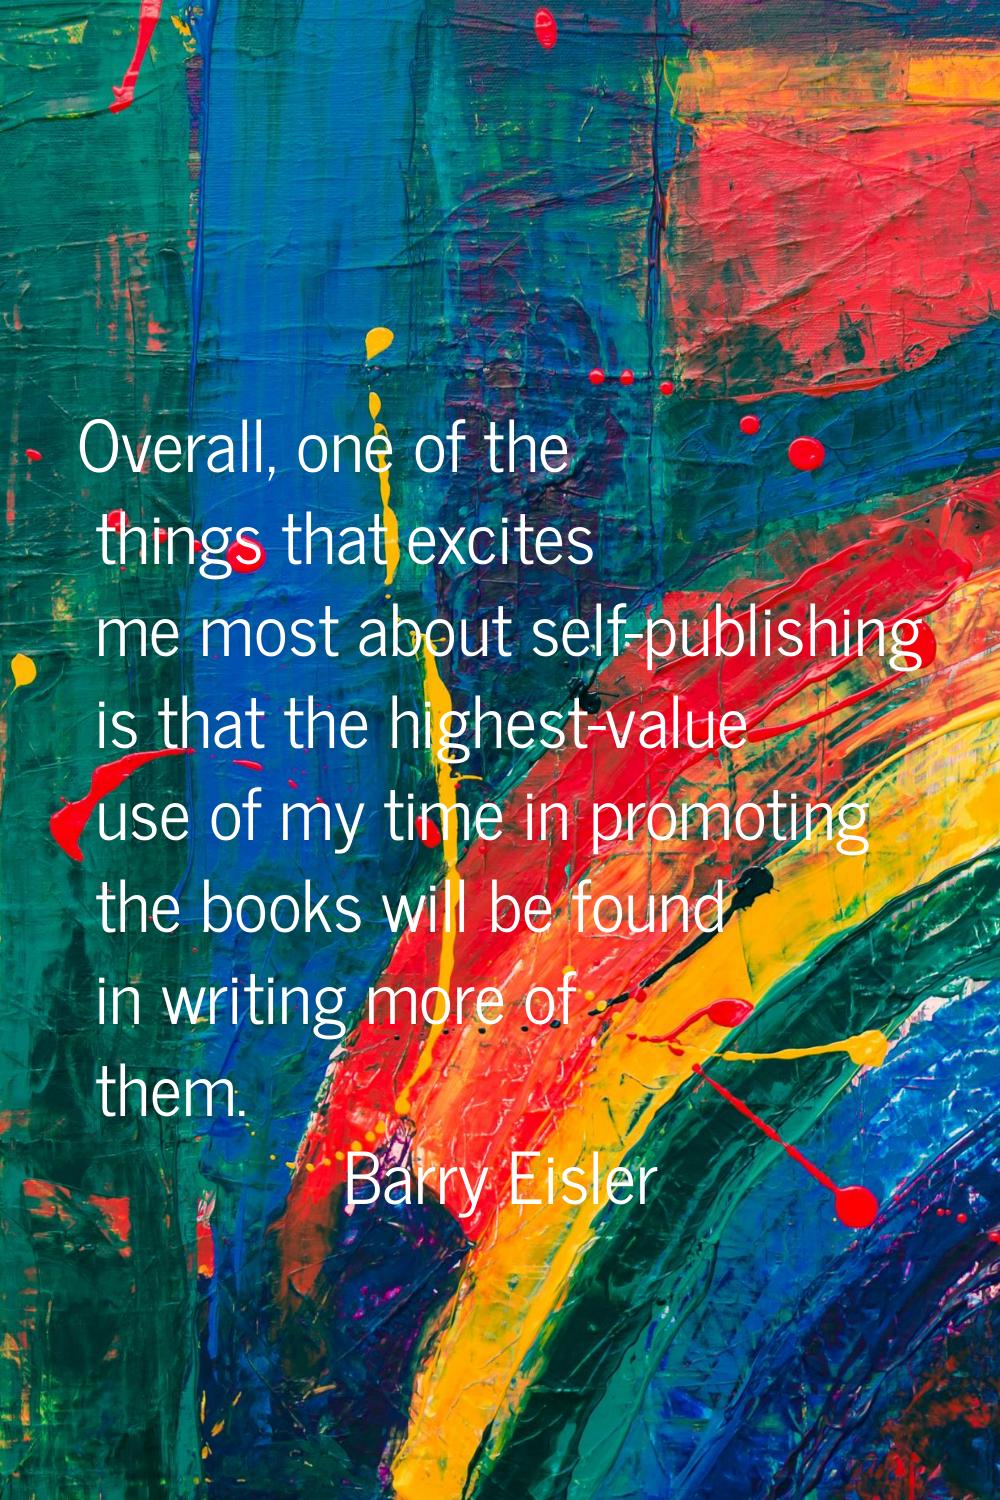 Overall, one of the things that excites me most about self-publishing is that the highest-value use